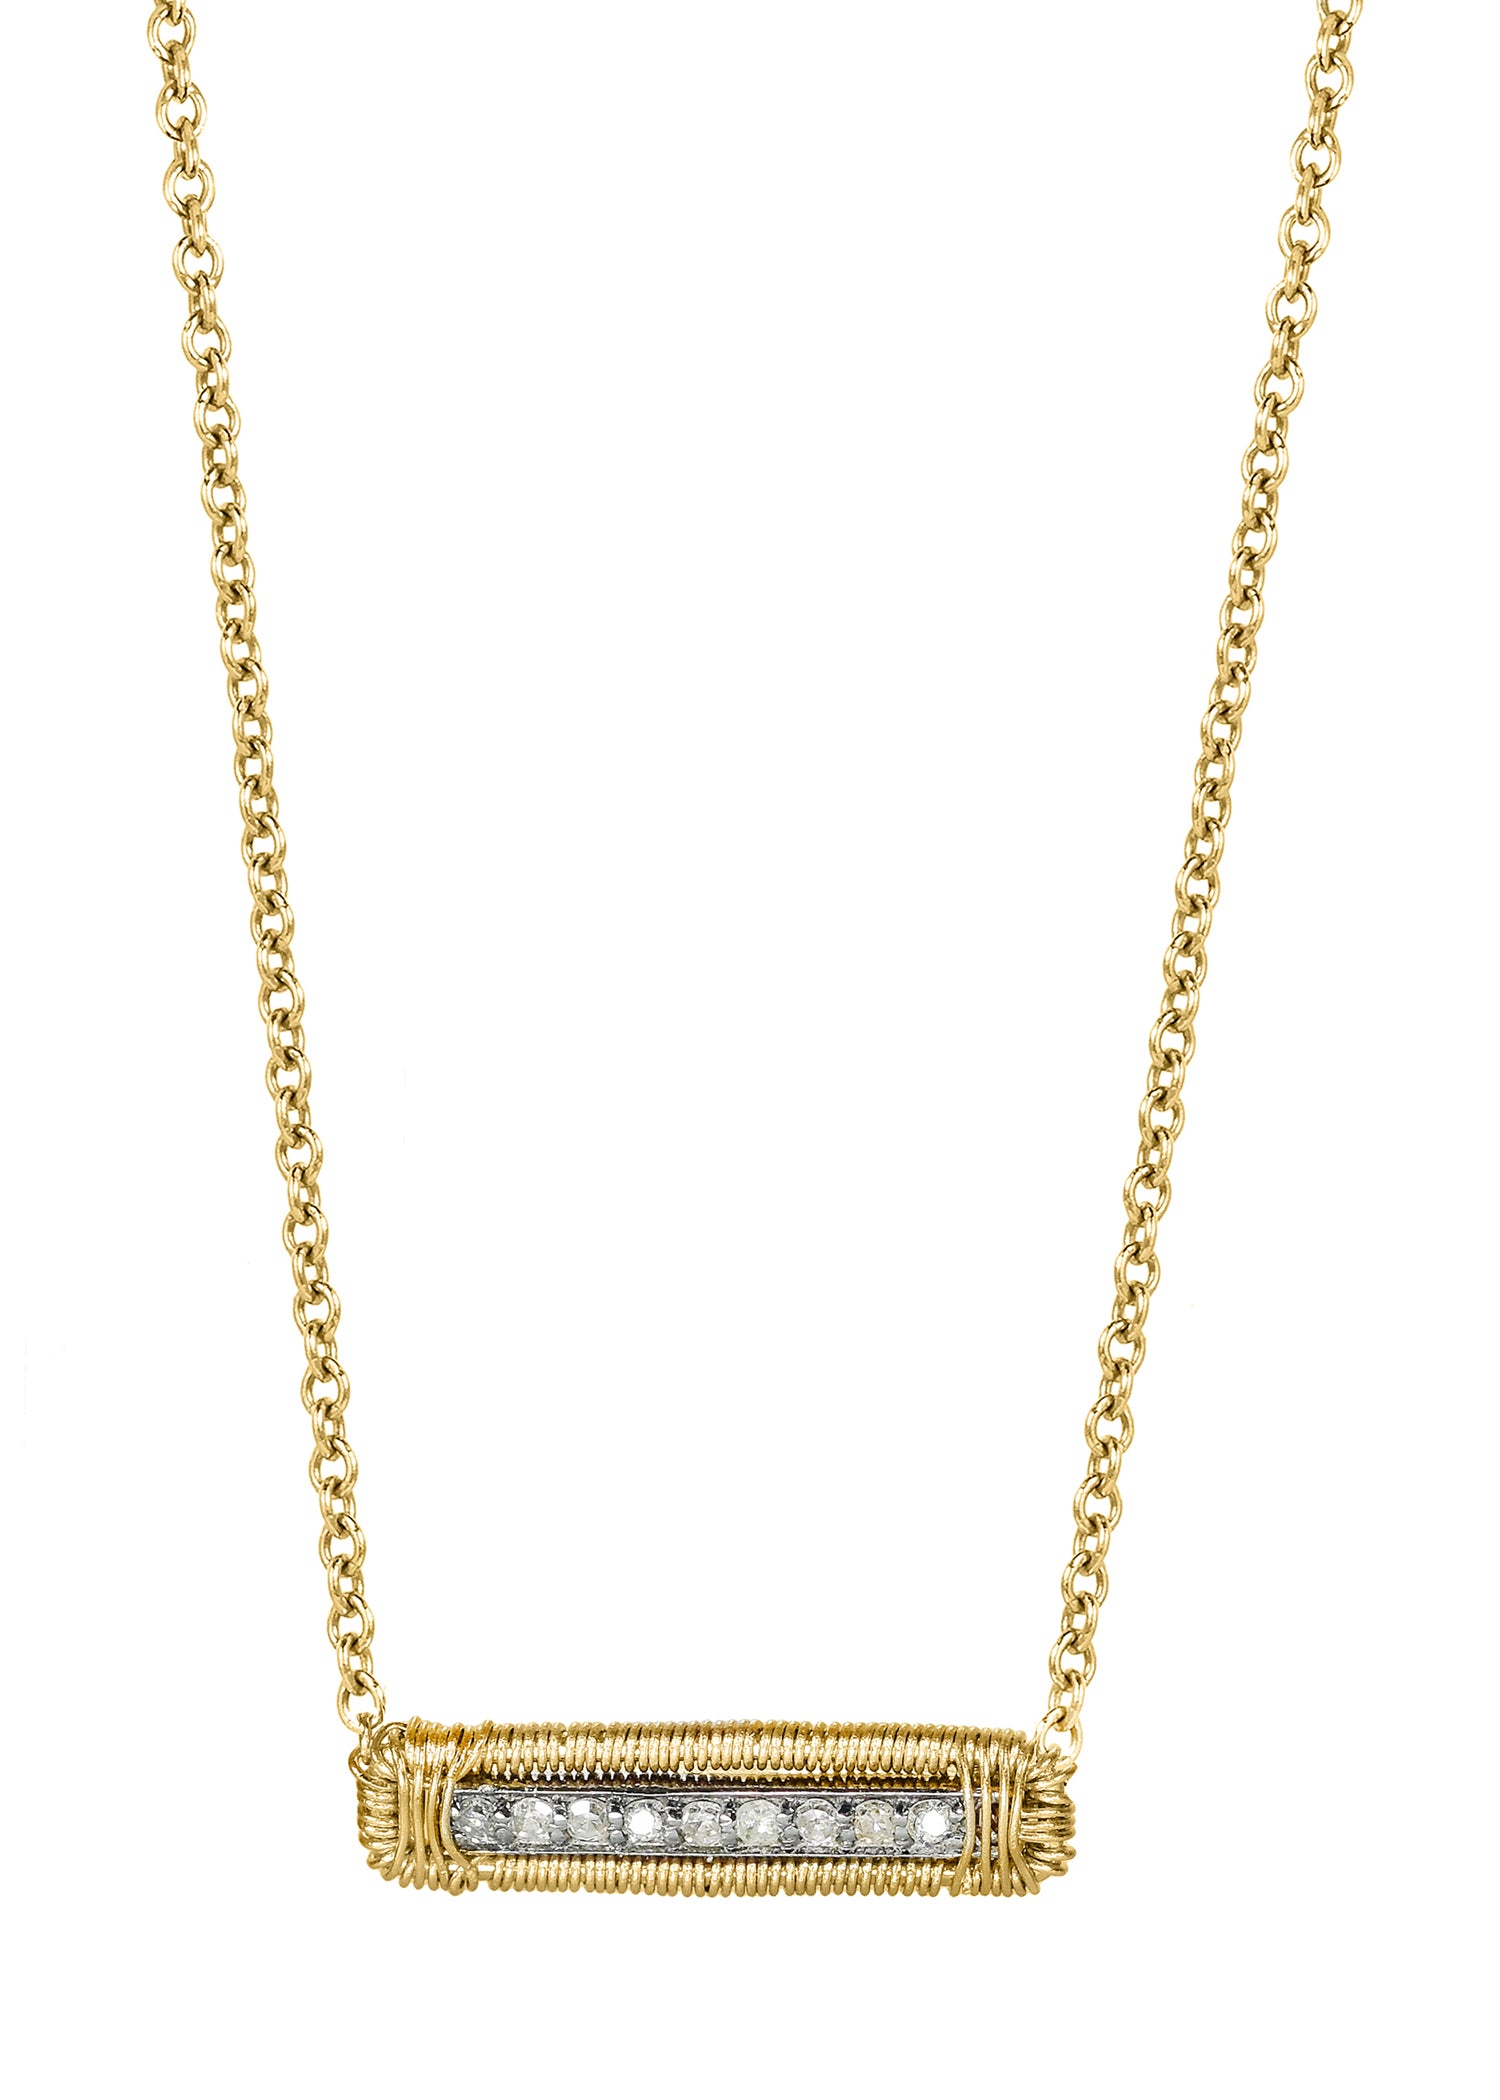 Diamond 14k gold Sterling silver Mixed metal Necklace measures 16" in length Pendant measures 3/16" in length and 5/8" in width Handmade in our Los Angeles studio